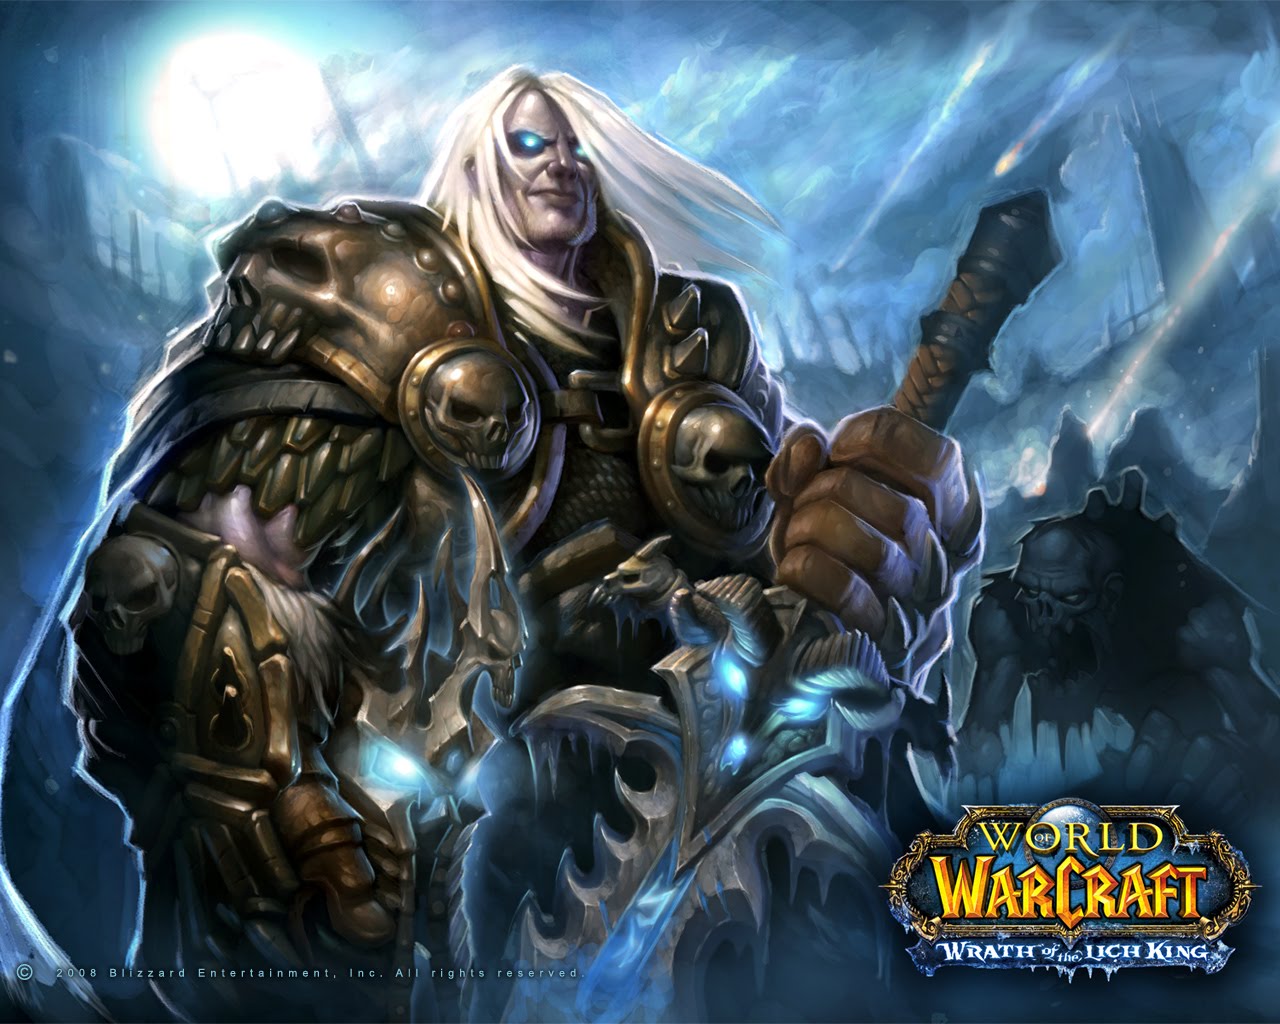 world of warcraft wallpapers 1080p world of warcraft full hd